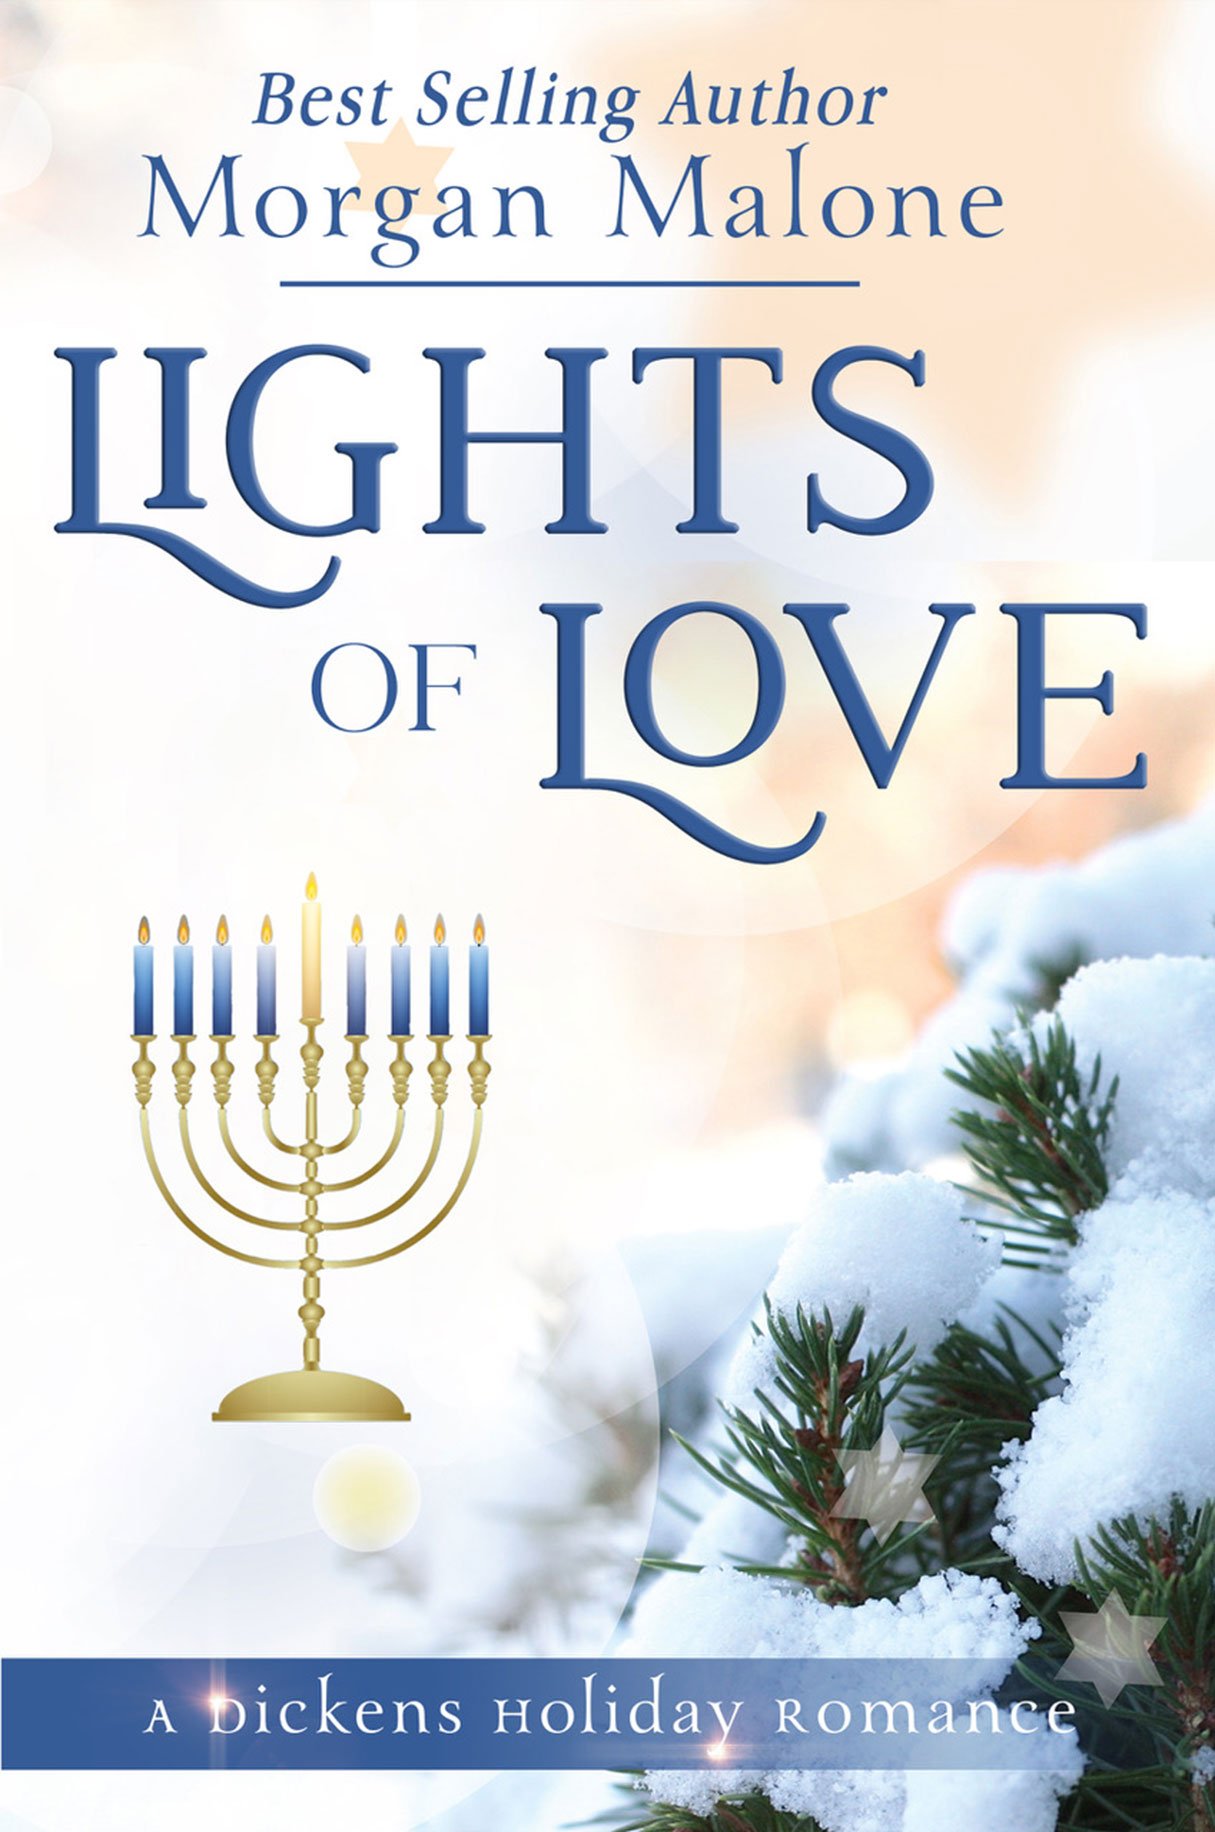 Lights of Love by Morgan Malone book cover